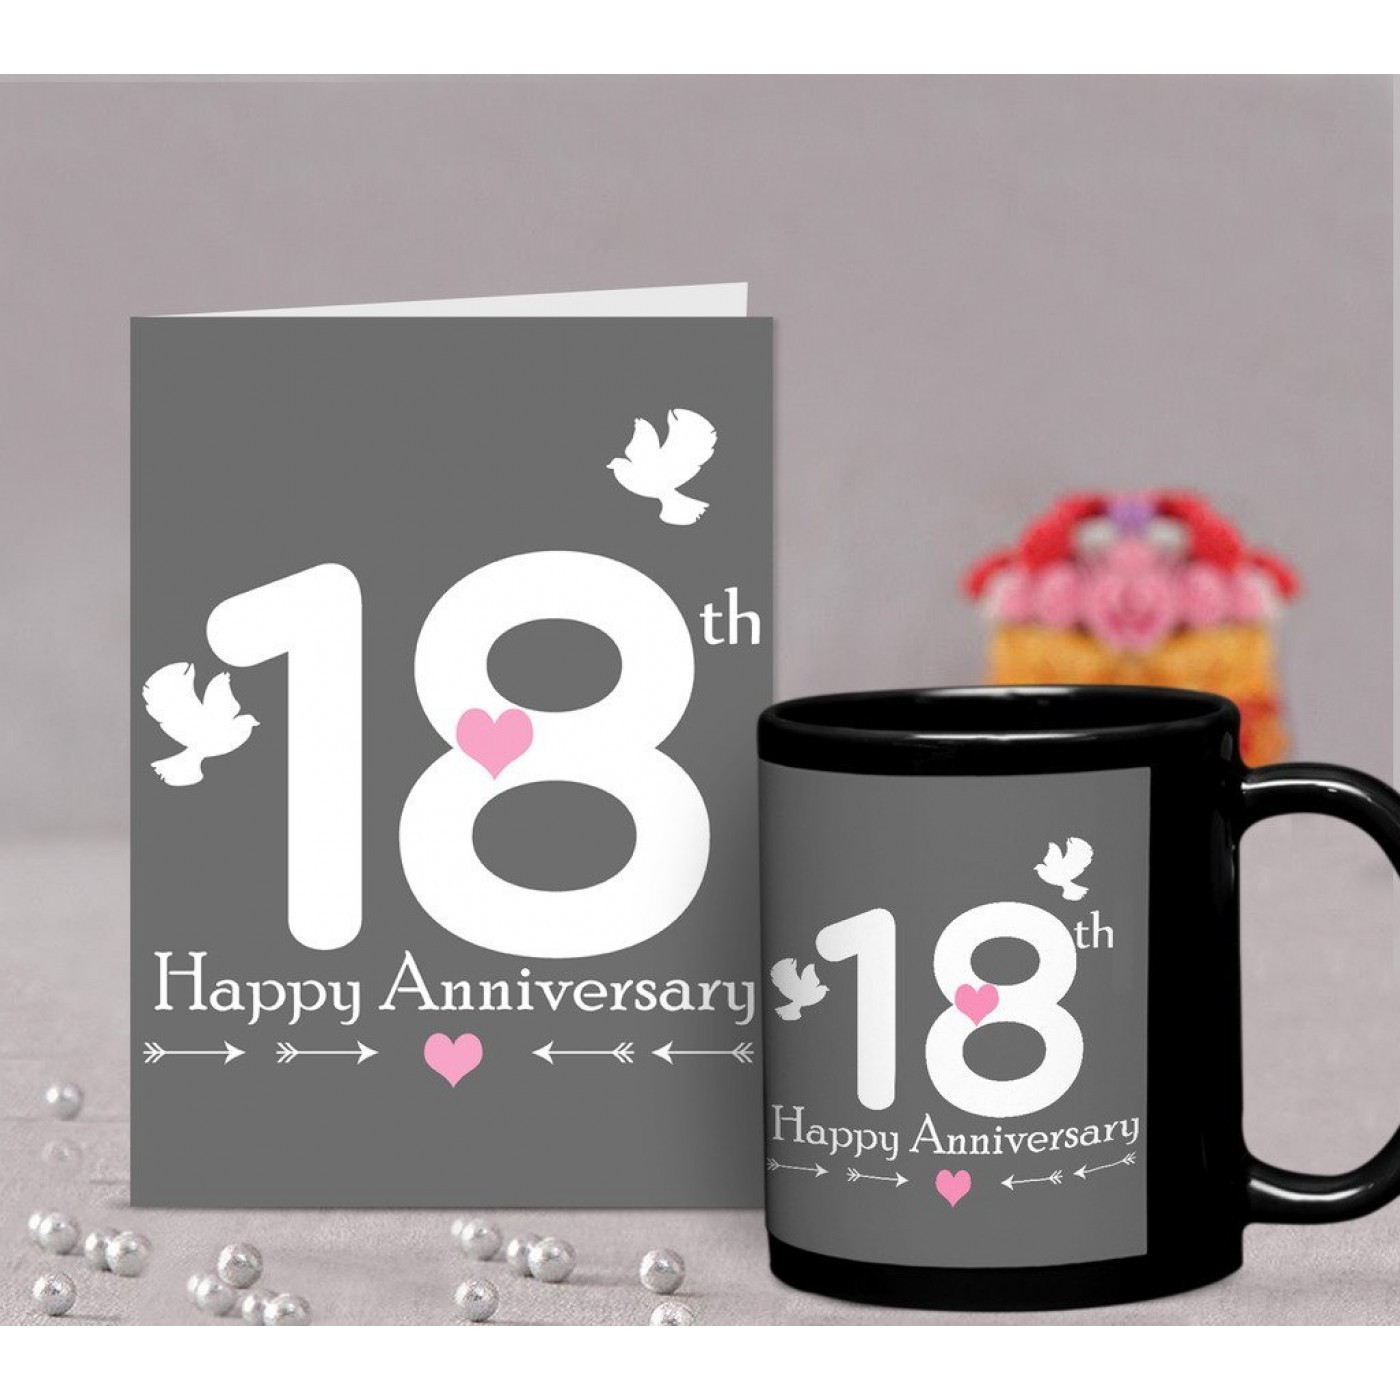 18 Year Anniversary Gift Ideas
 18th Wedding Anniversary Gift Ideas Gift Ftempo